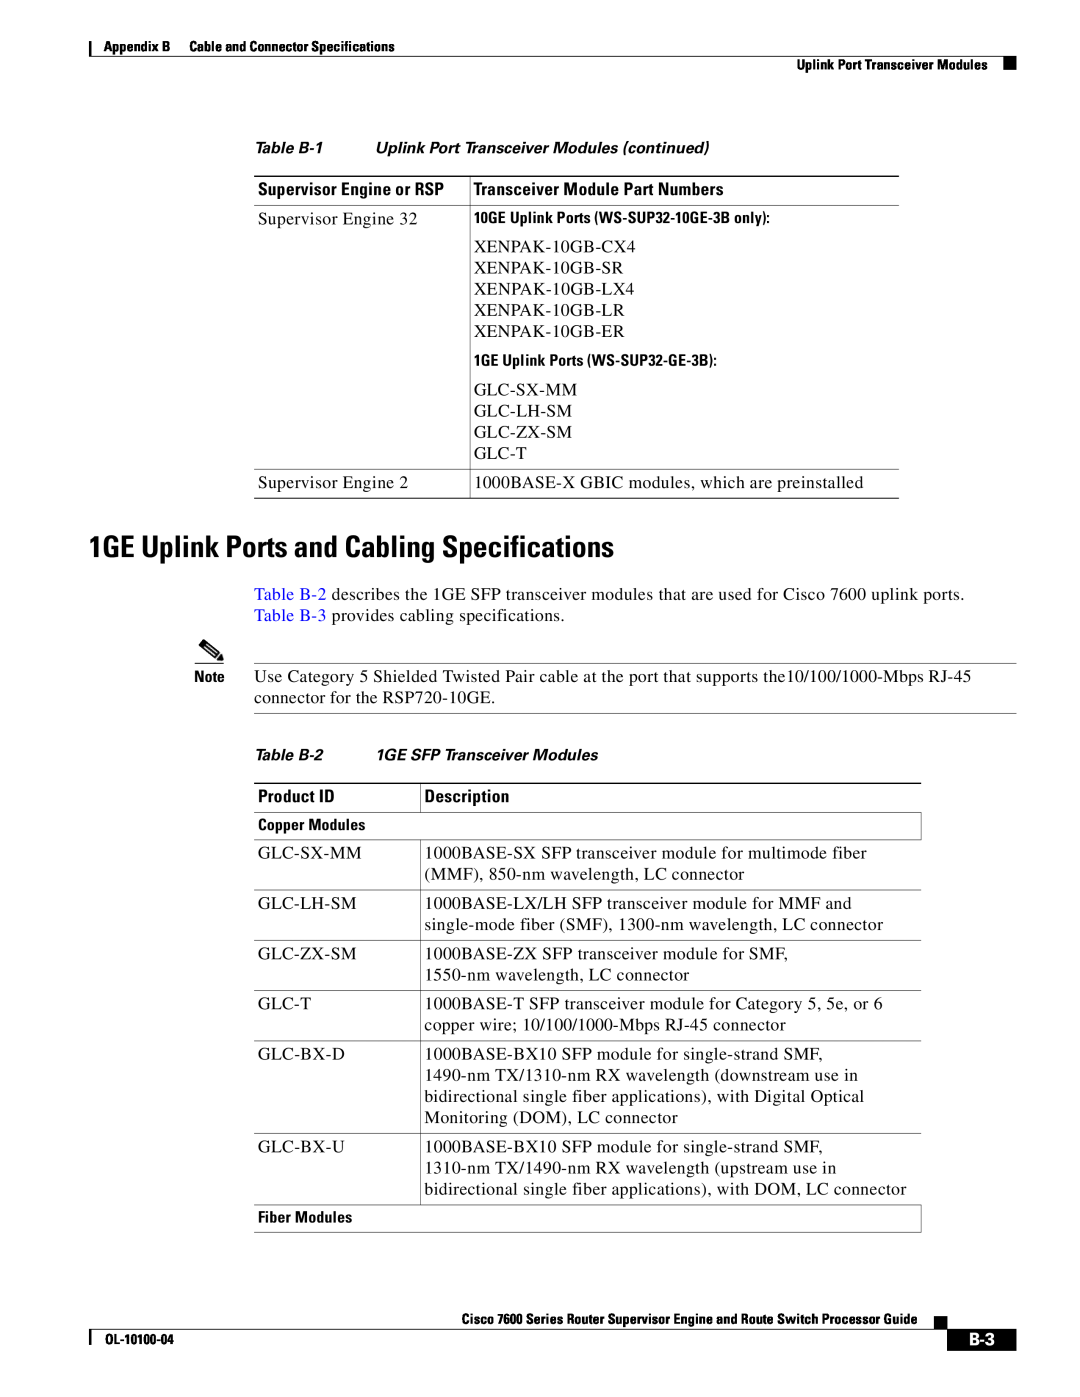 Cisco Systems 7600 manual 1GE Uplink Ports and Cabling Specifications 